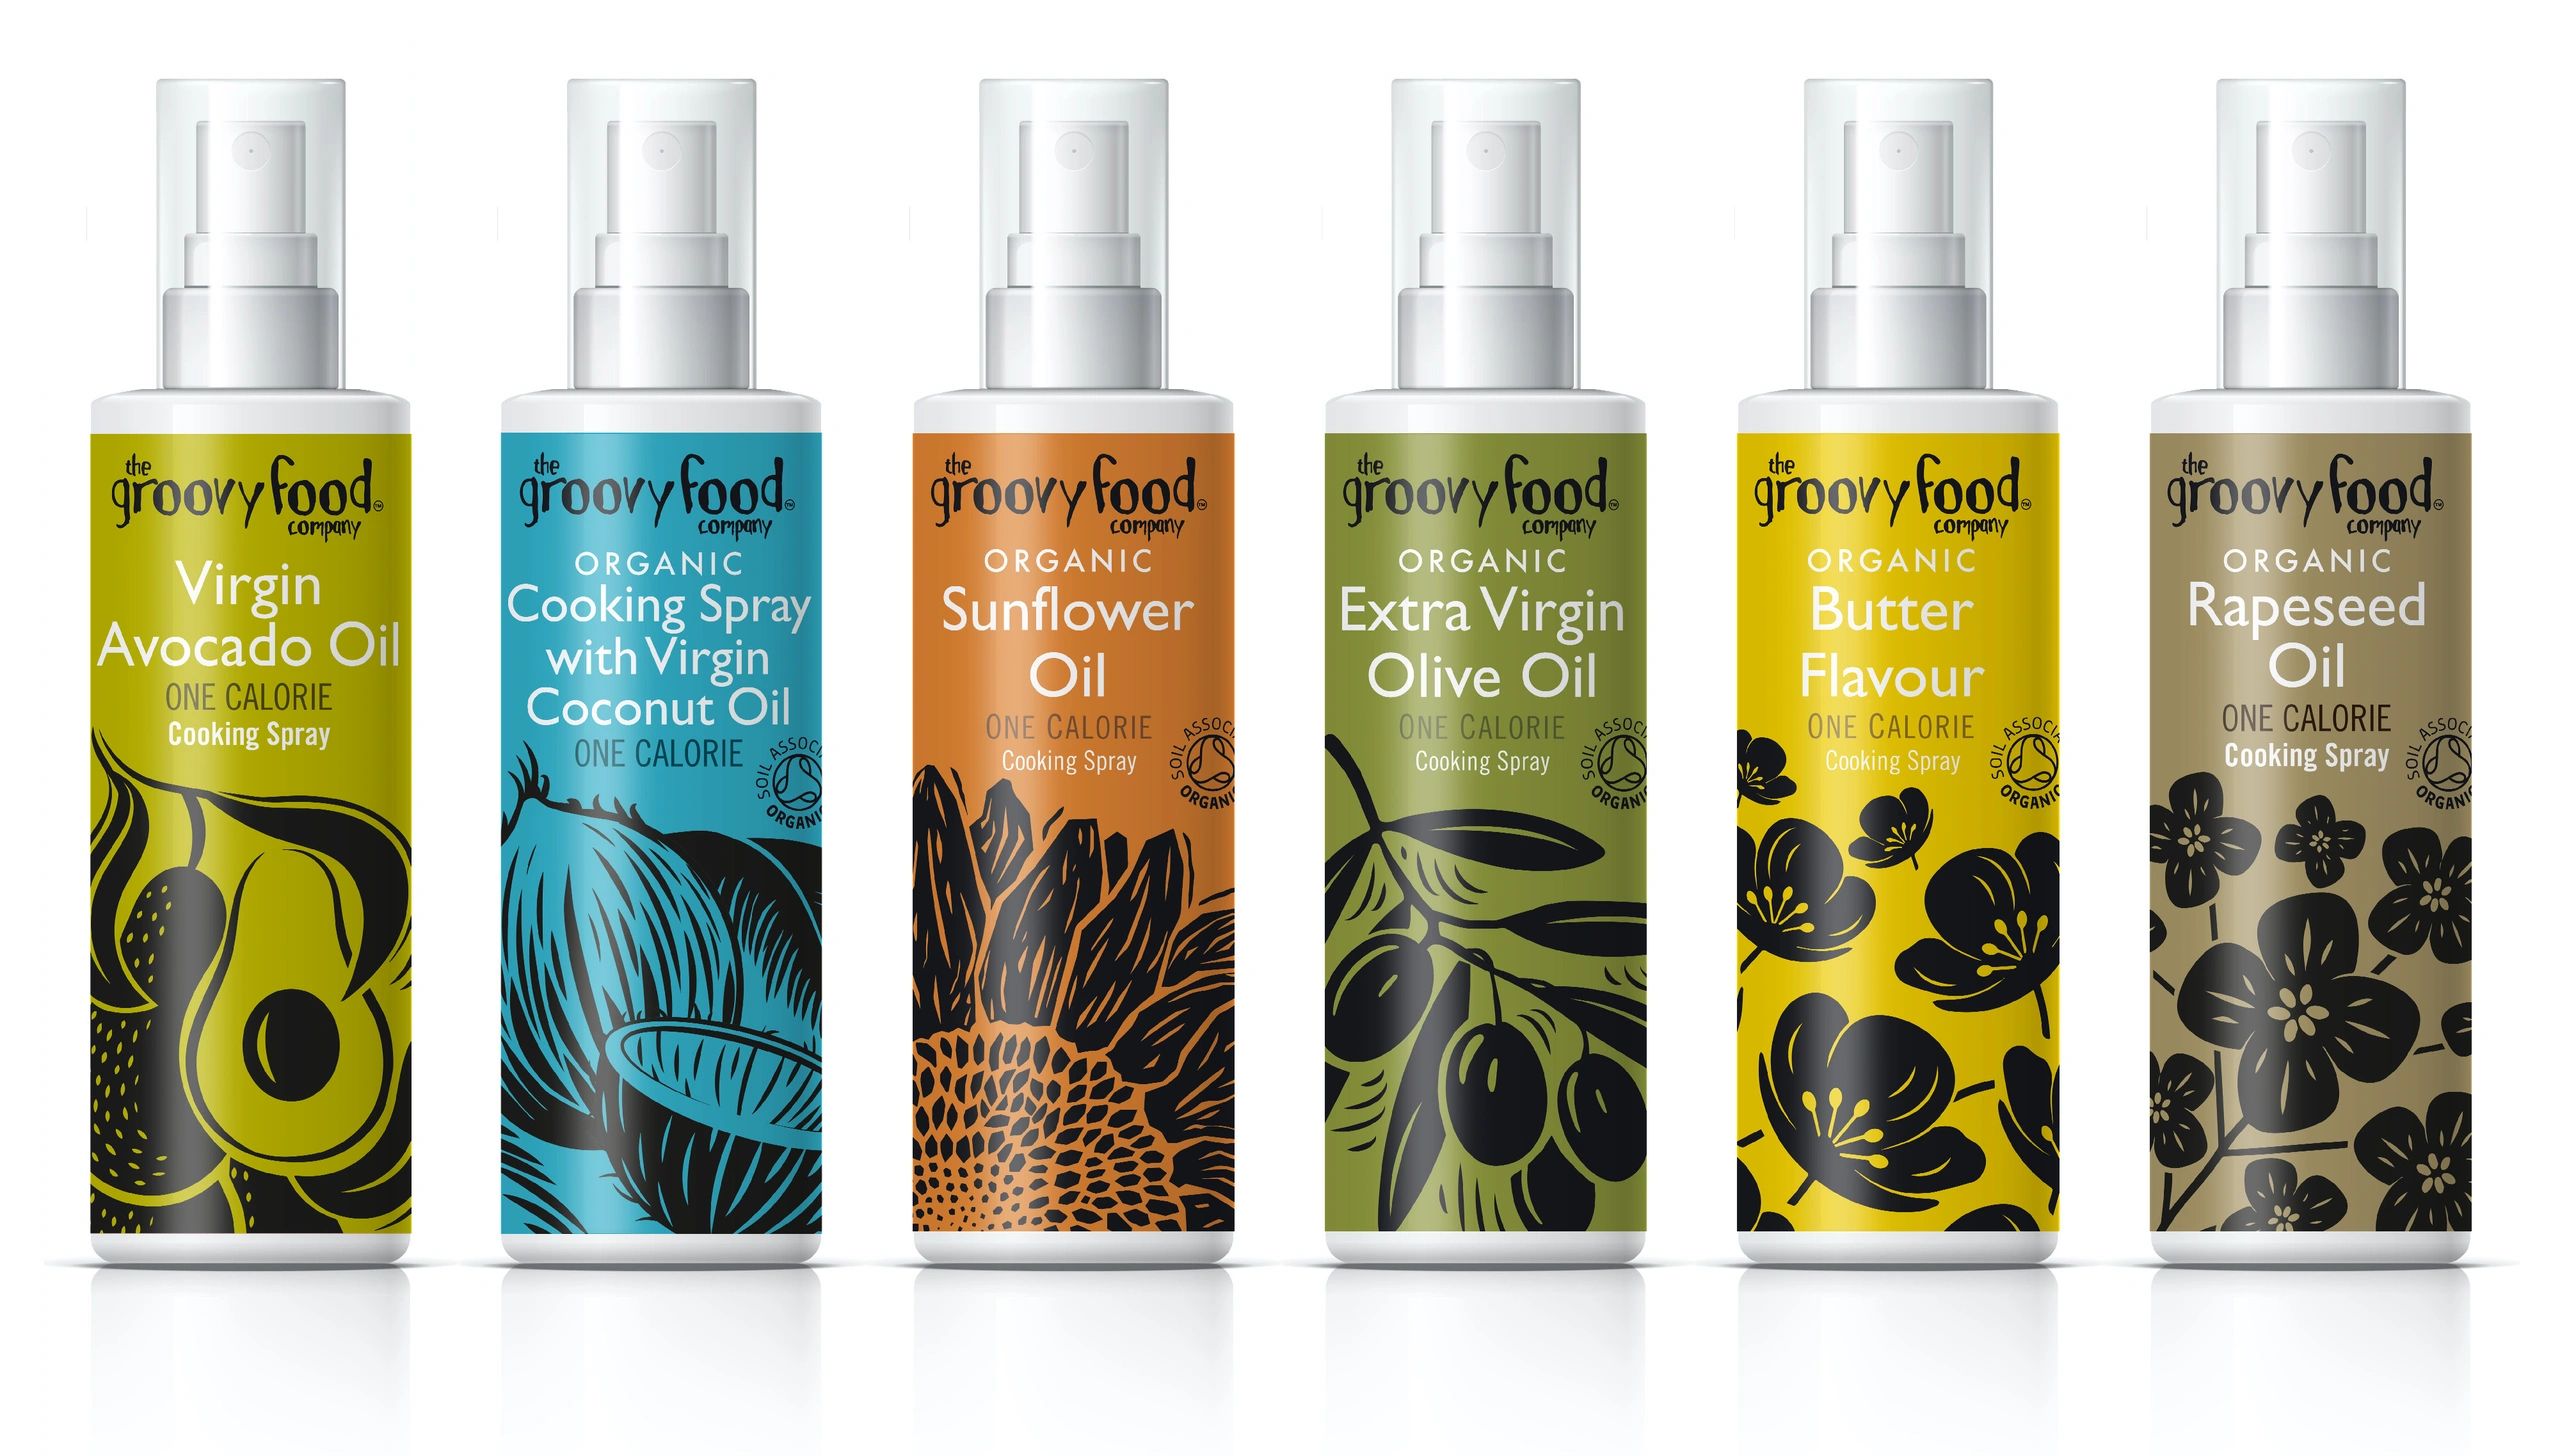 Packaging design Cooking oil spray.
 THE GROOVY FOOD COMPANY
Food packaging design.